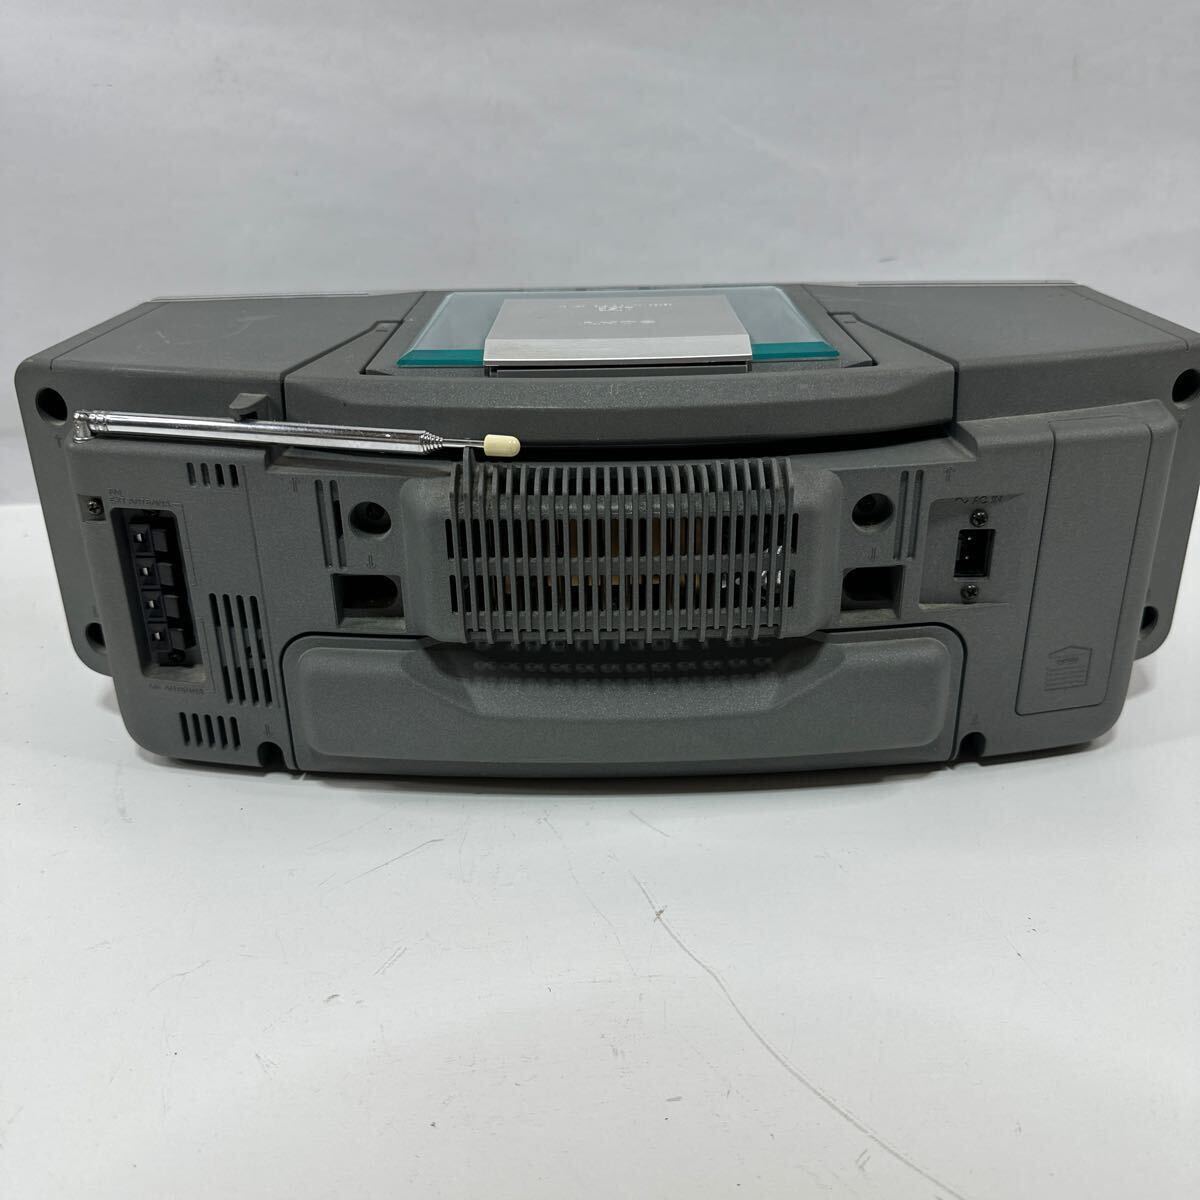 [ electrification has confirmed ]CD radio-cassette SONY ZS-M50 personal MD system player audio Sony (1062)